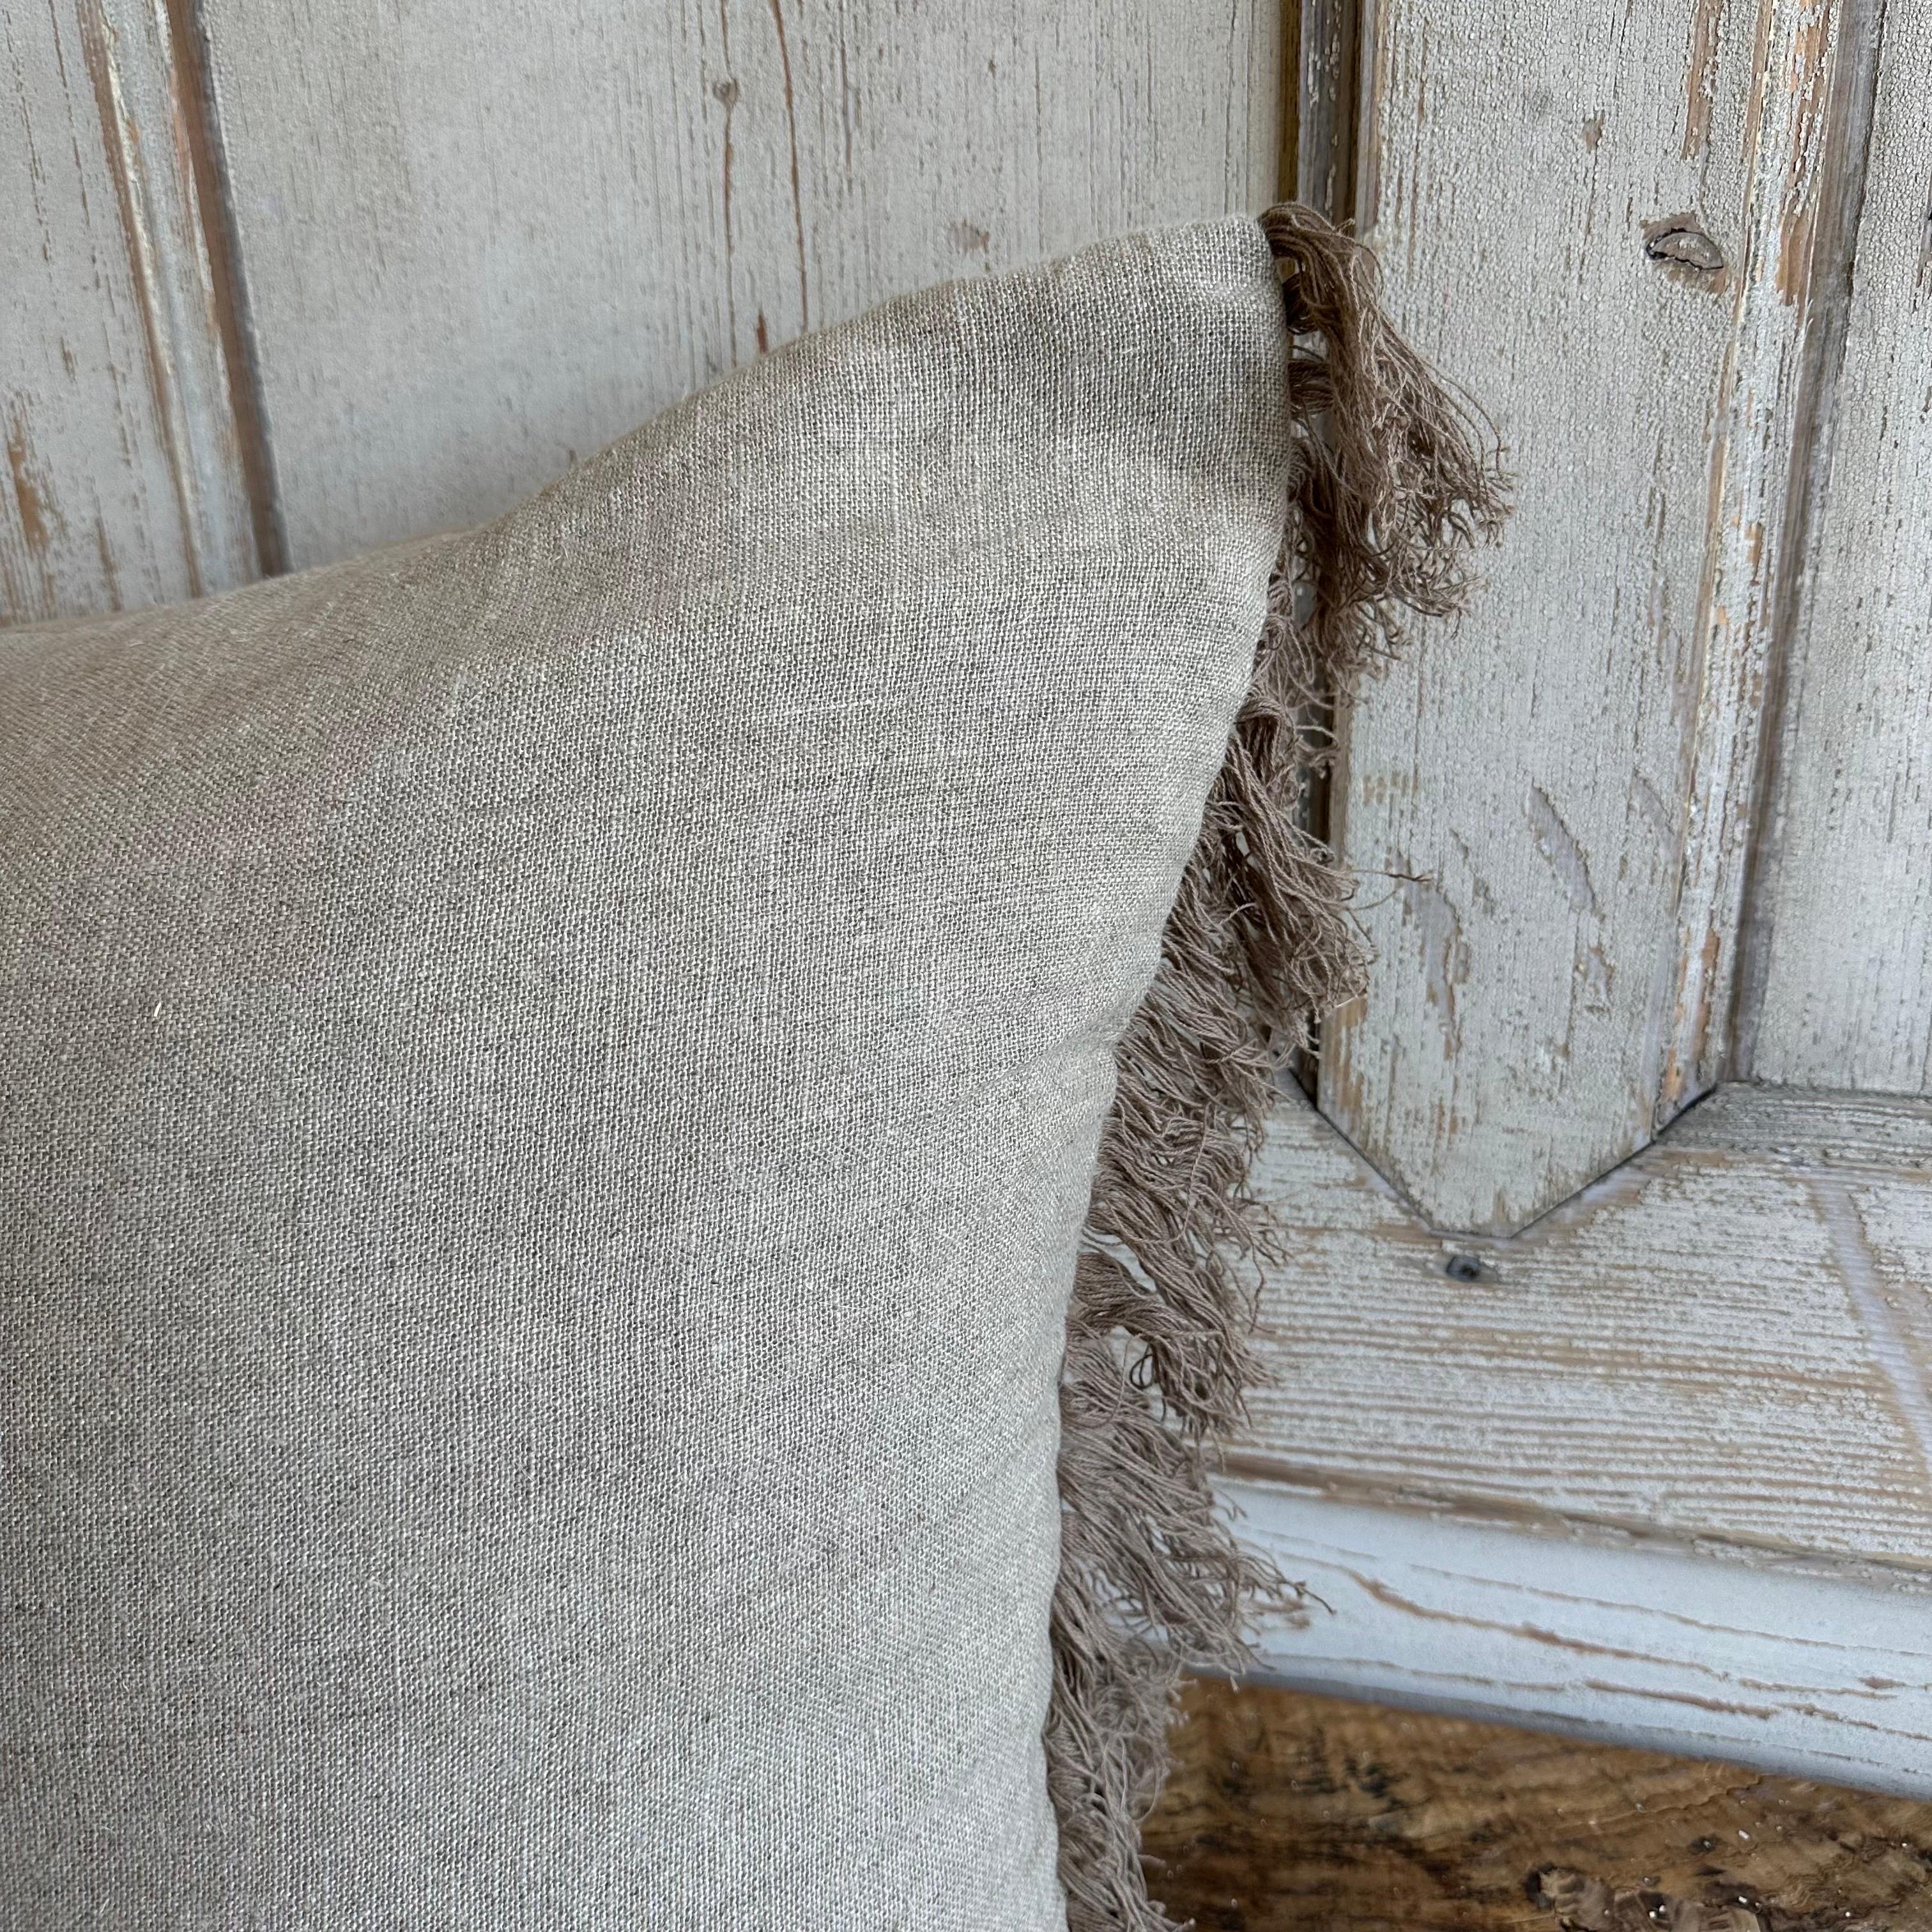 Contemporary French XL King Size Lumbar Linen Pillow with Fringe Edges For Sale